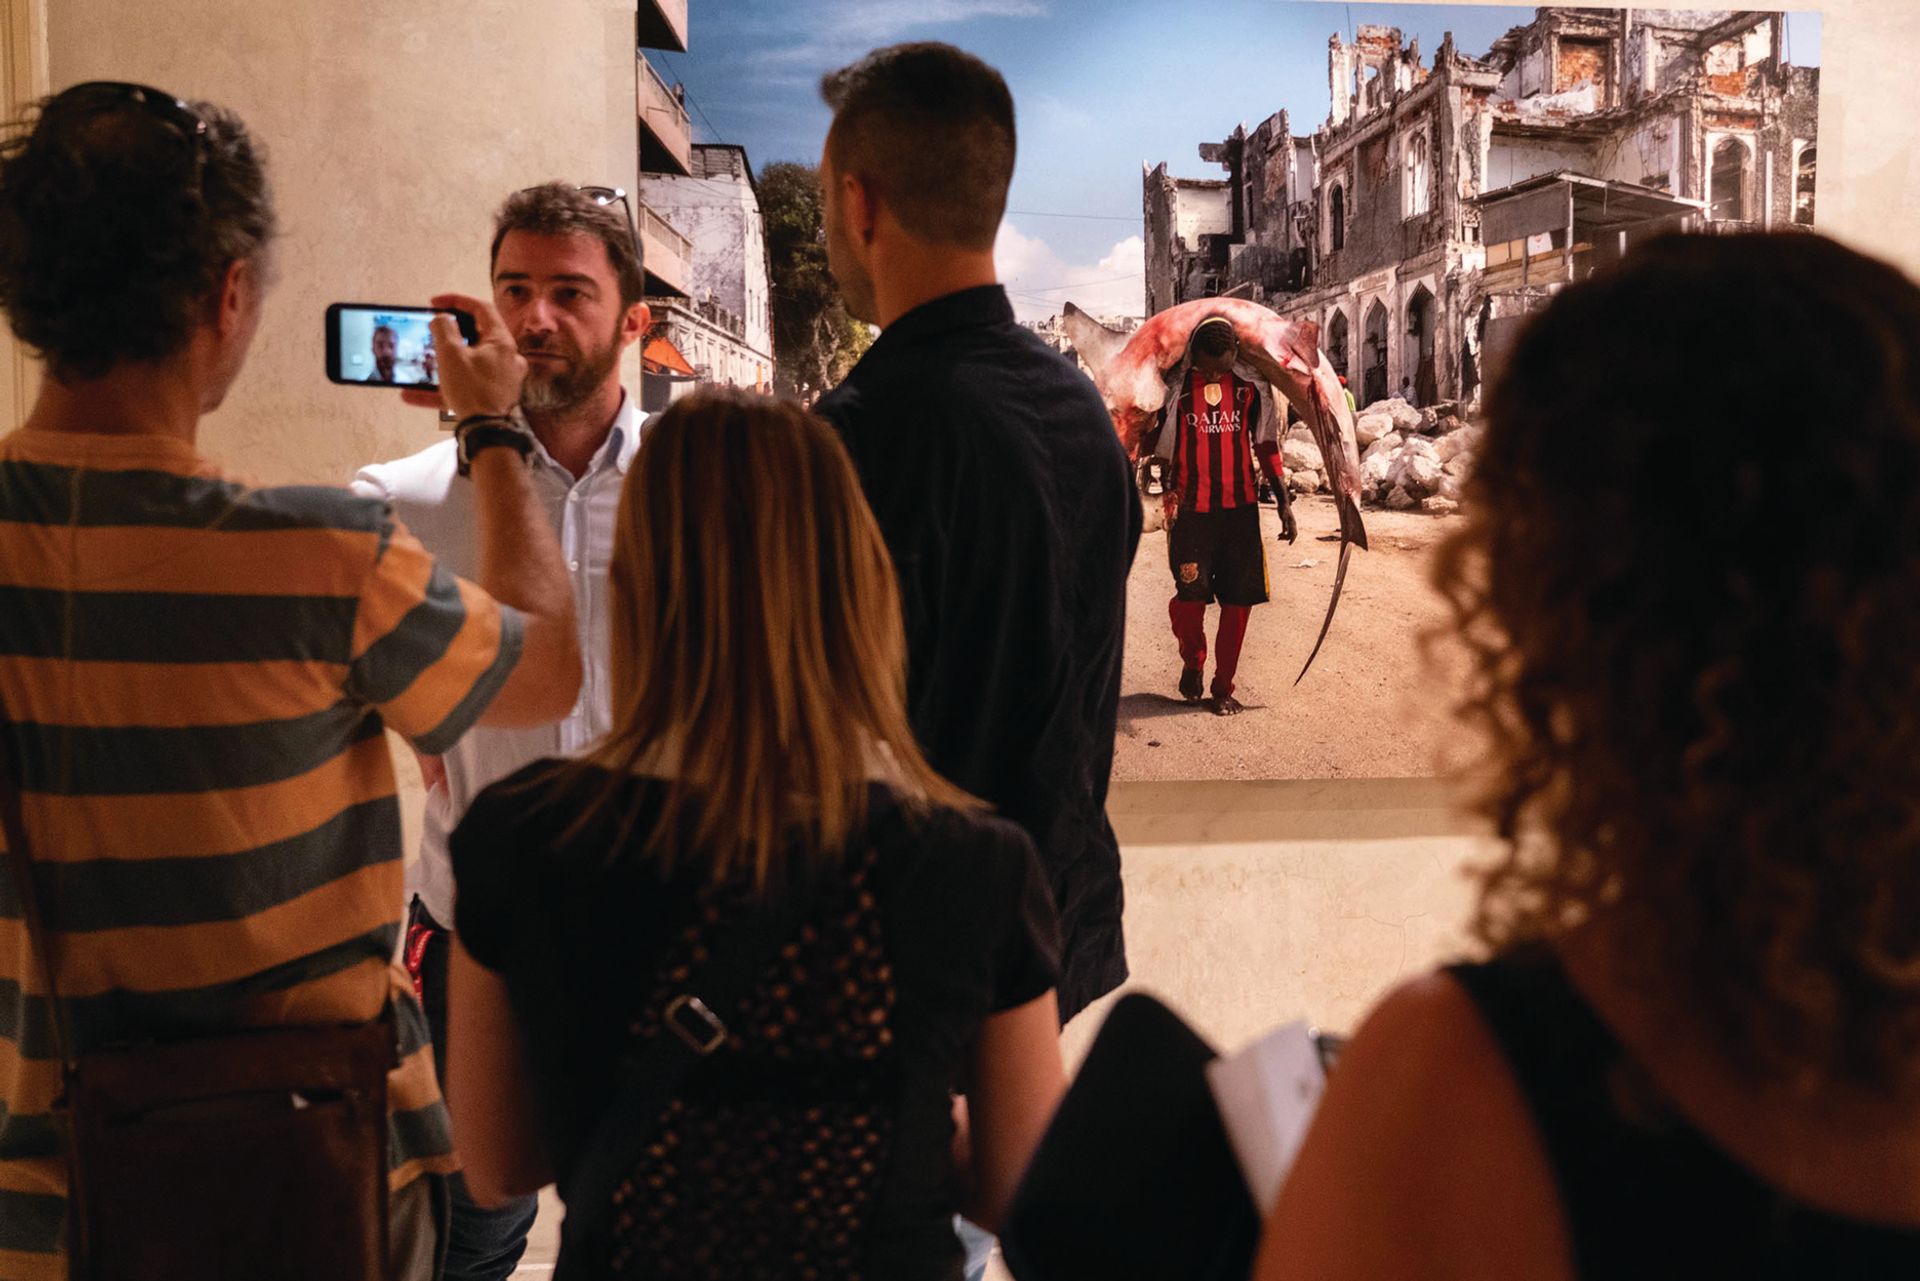 Italian photographer Marco Gualazzini at his exhibition Resilient at Palazzo Pigorini in Parma in 2019, showing his reportage of humanitarian crises in Africa from 2009 to 2018 © Città di Parma